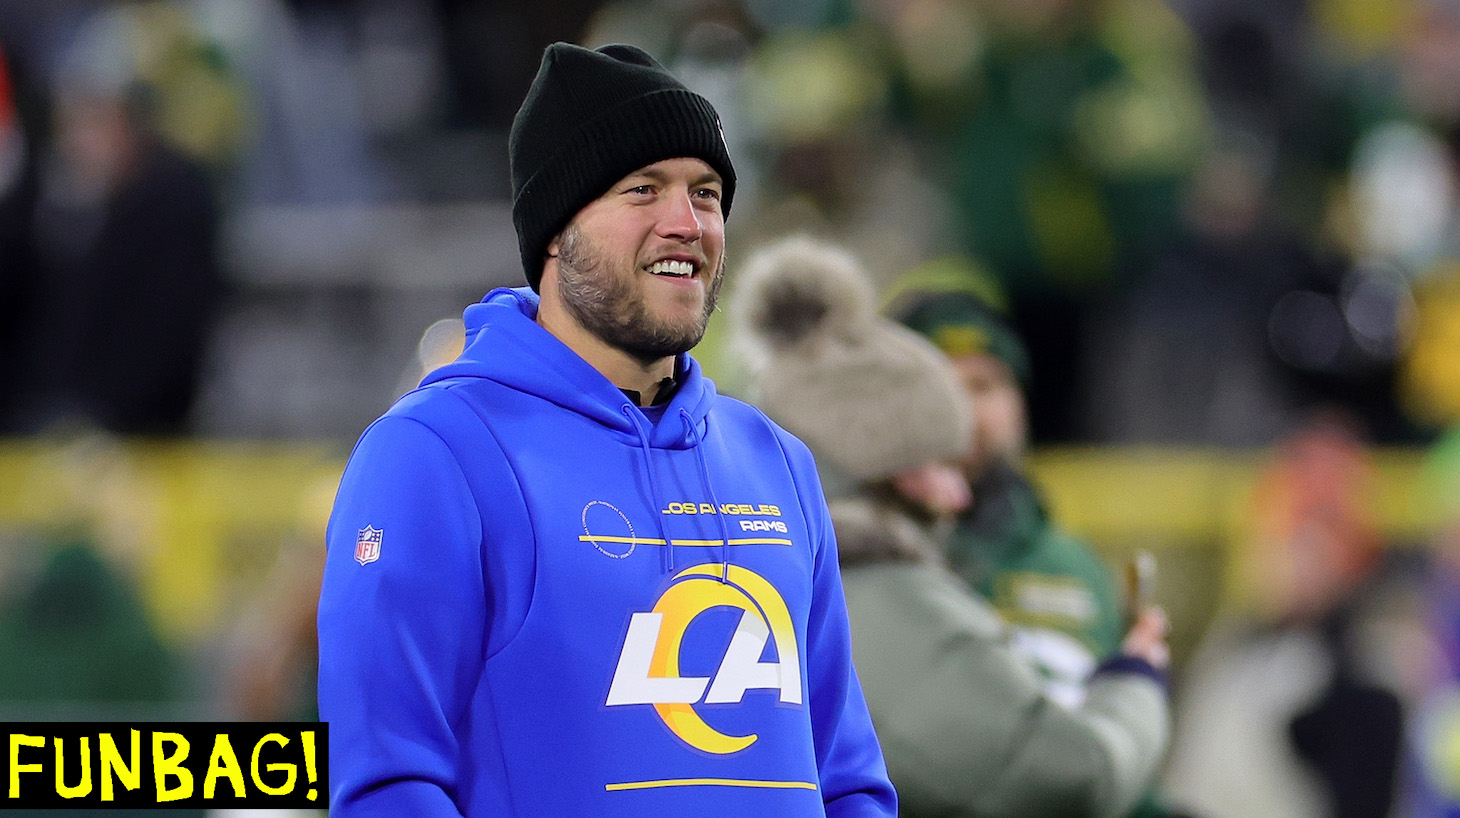 GREEN BAY, WISCONSIN - DECEMBER 19: Matthew Stafford #9 of the Los Angeles Rams watches action prior to a game against the Green Bay Packers at Lambeau Field on December 19, 2022 in Green Bay, Wisconsin. The Packers defeated the Rams 24-12. (Photo by Stacy Revere/Getty Images)